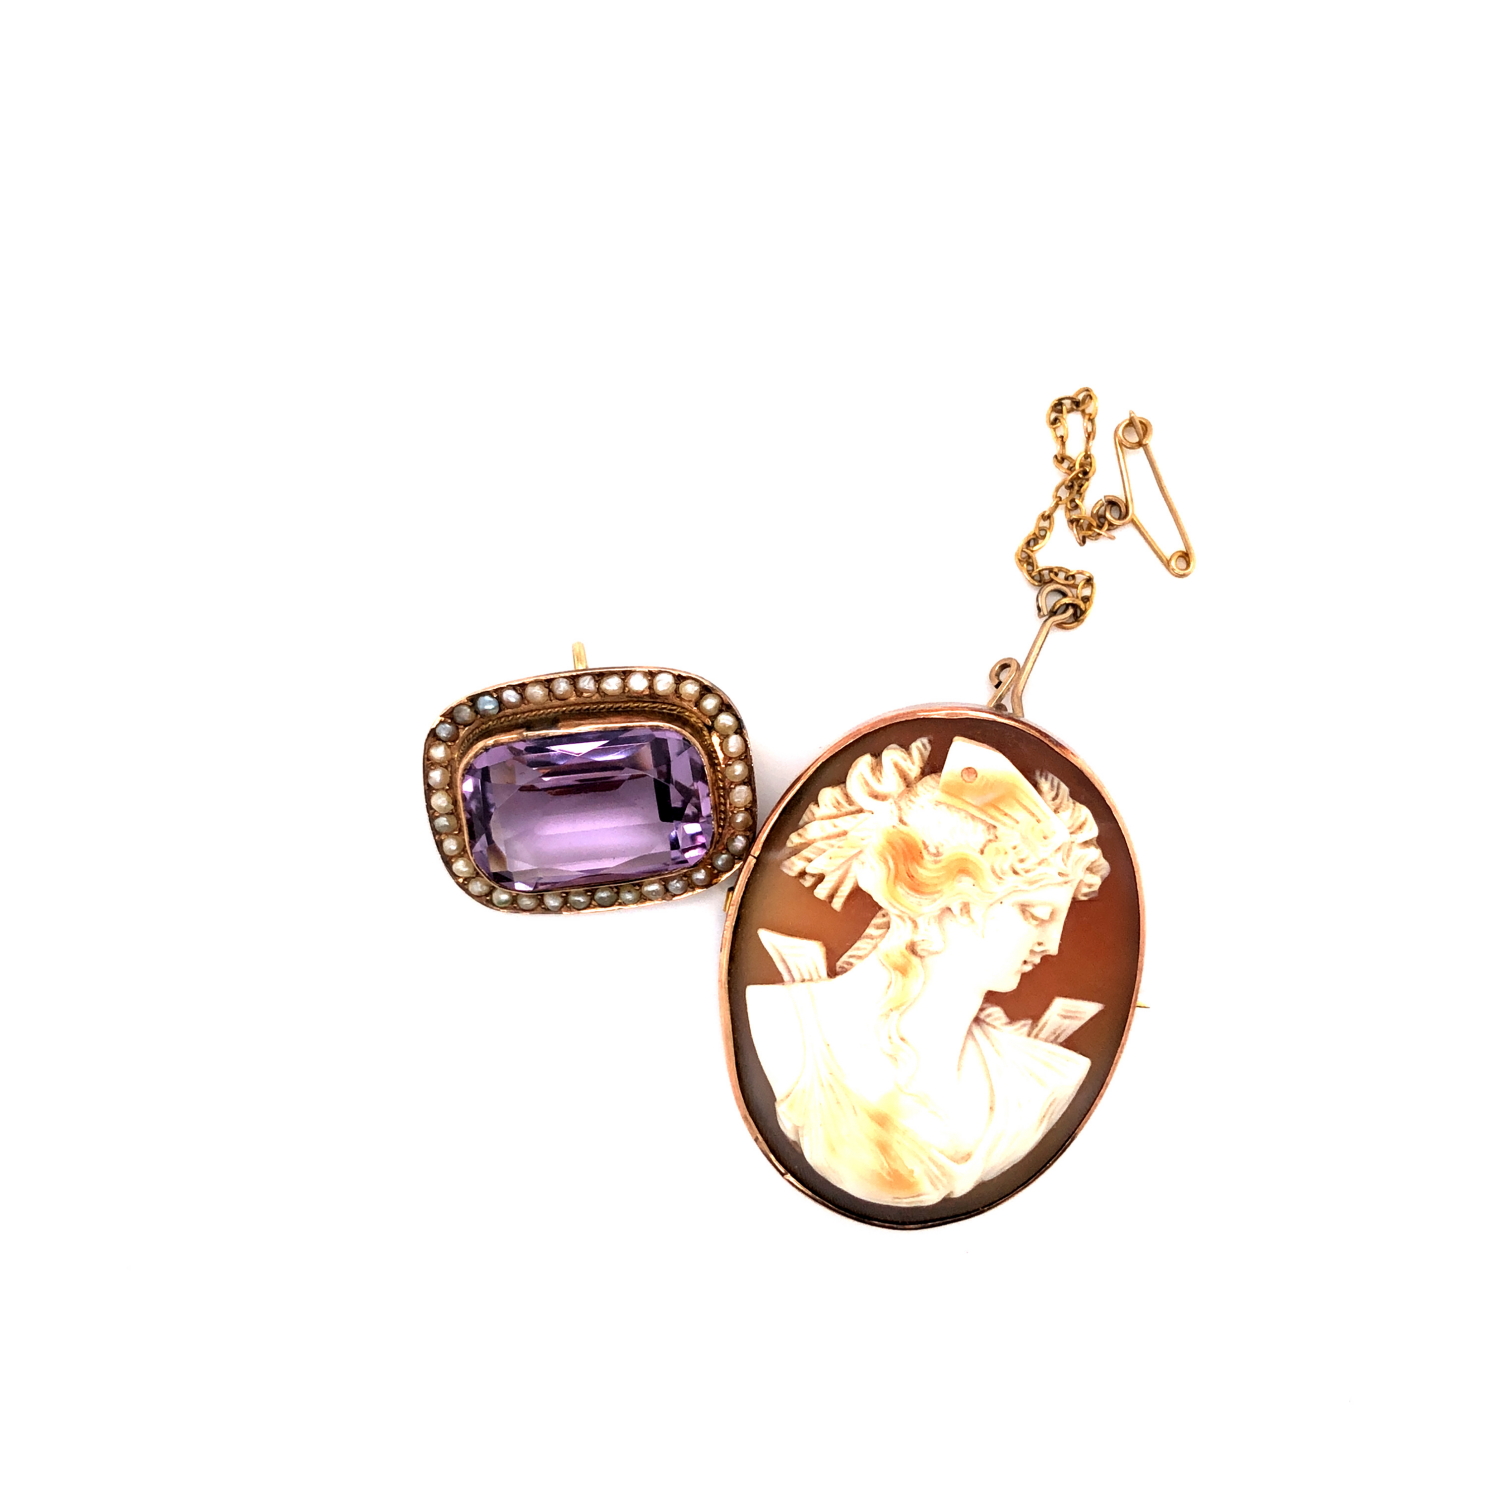 A VINTAGE 9ct HALLMARKED AMETHYST AND SEED PEARL BROOCH, TOGETHER WITH A EARLY 20th CENTURY PORTRAIT - Image 2 of 3